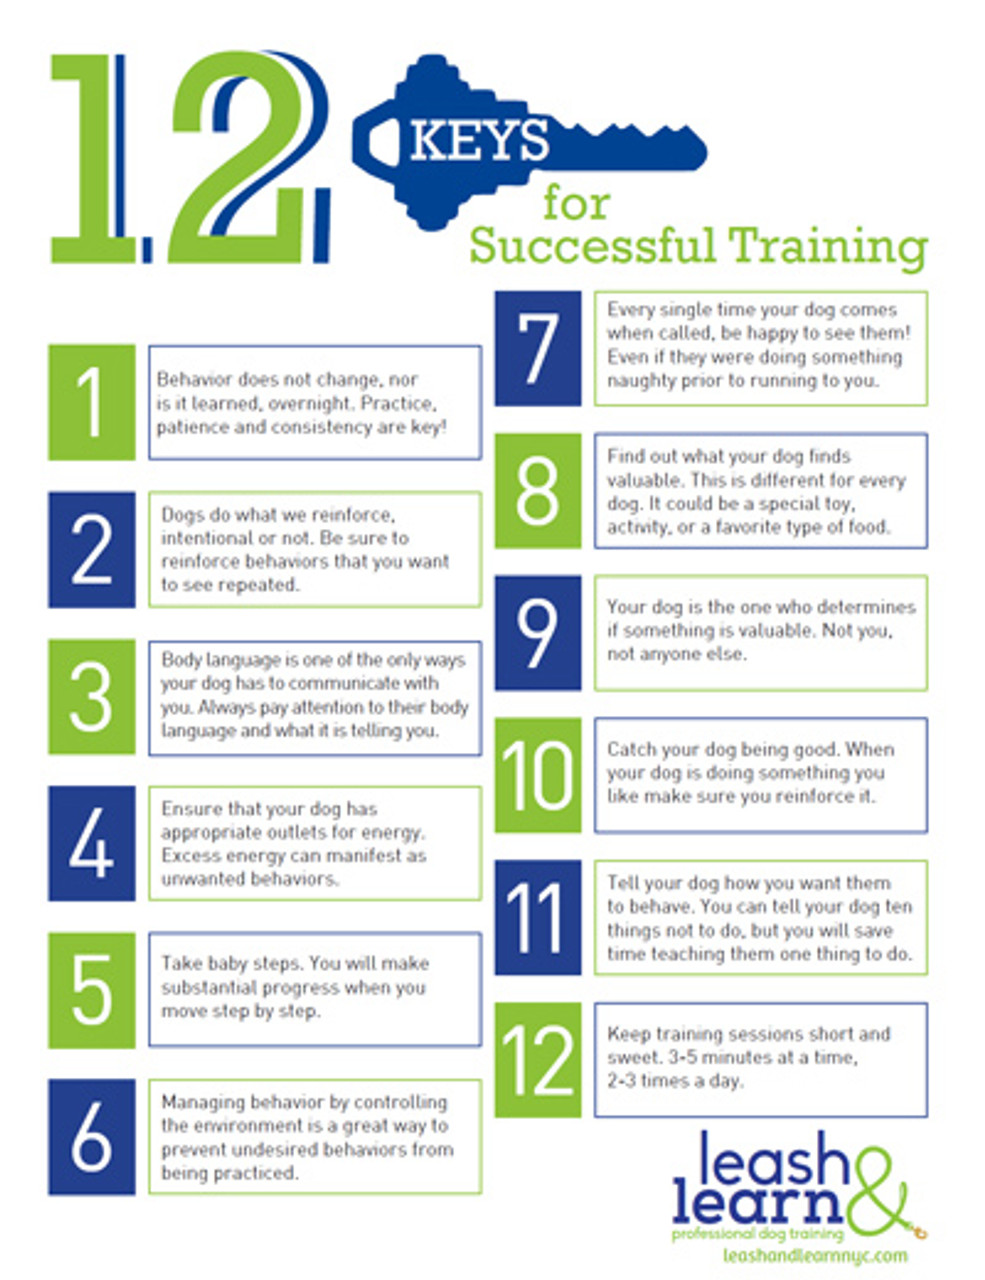 6 Must-Have Tools for Successful Puppy Training